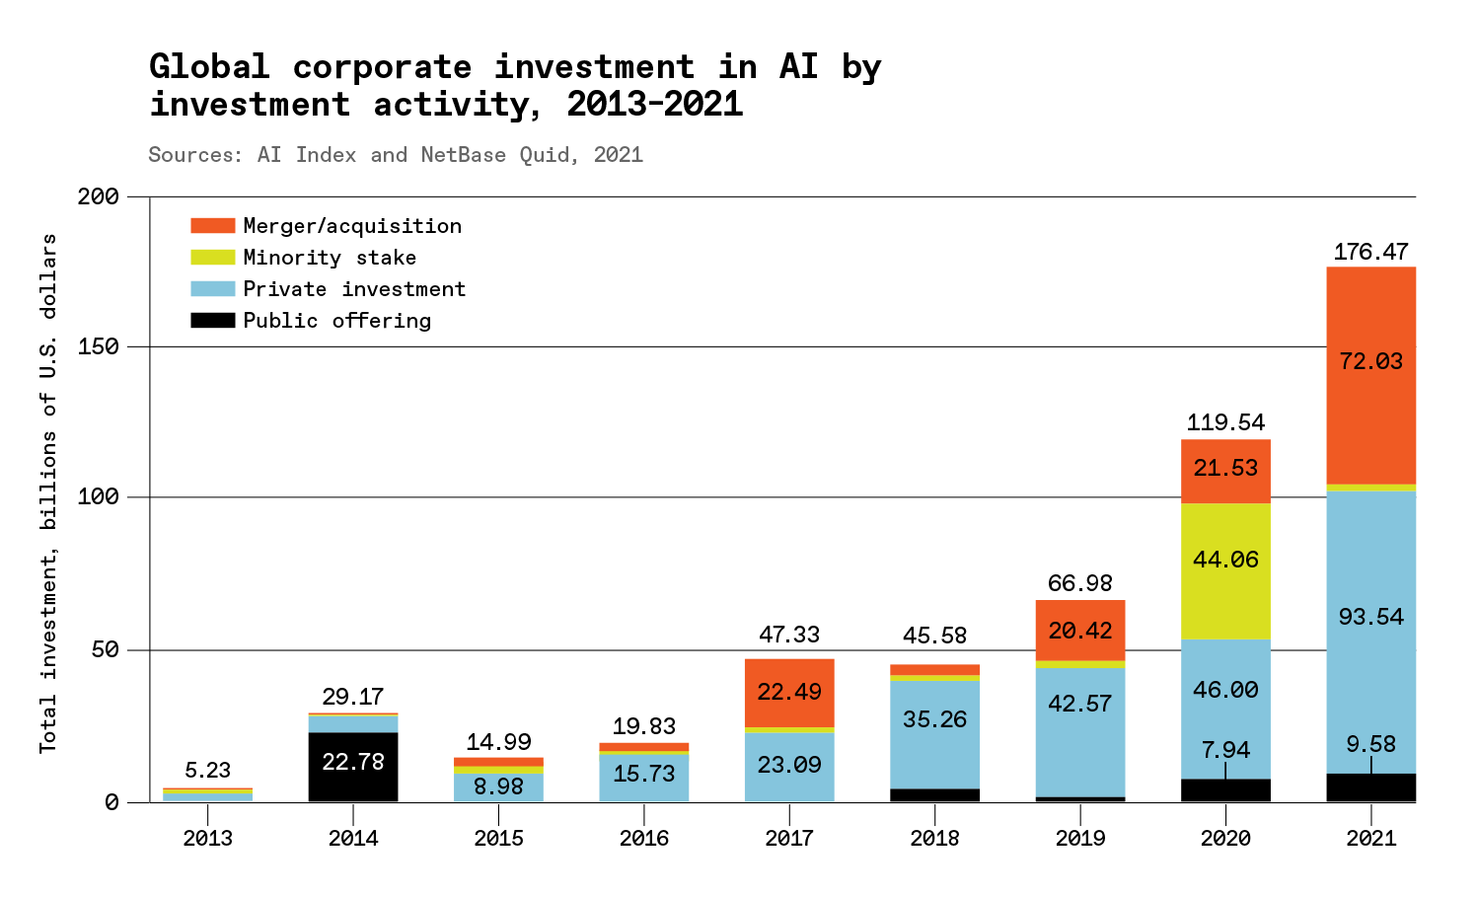 A bar chart of "global corporate investment in AI by investment activity, 2013-2021"